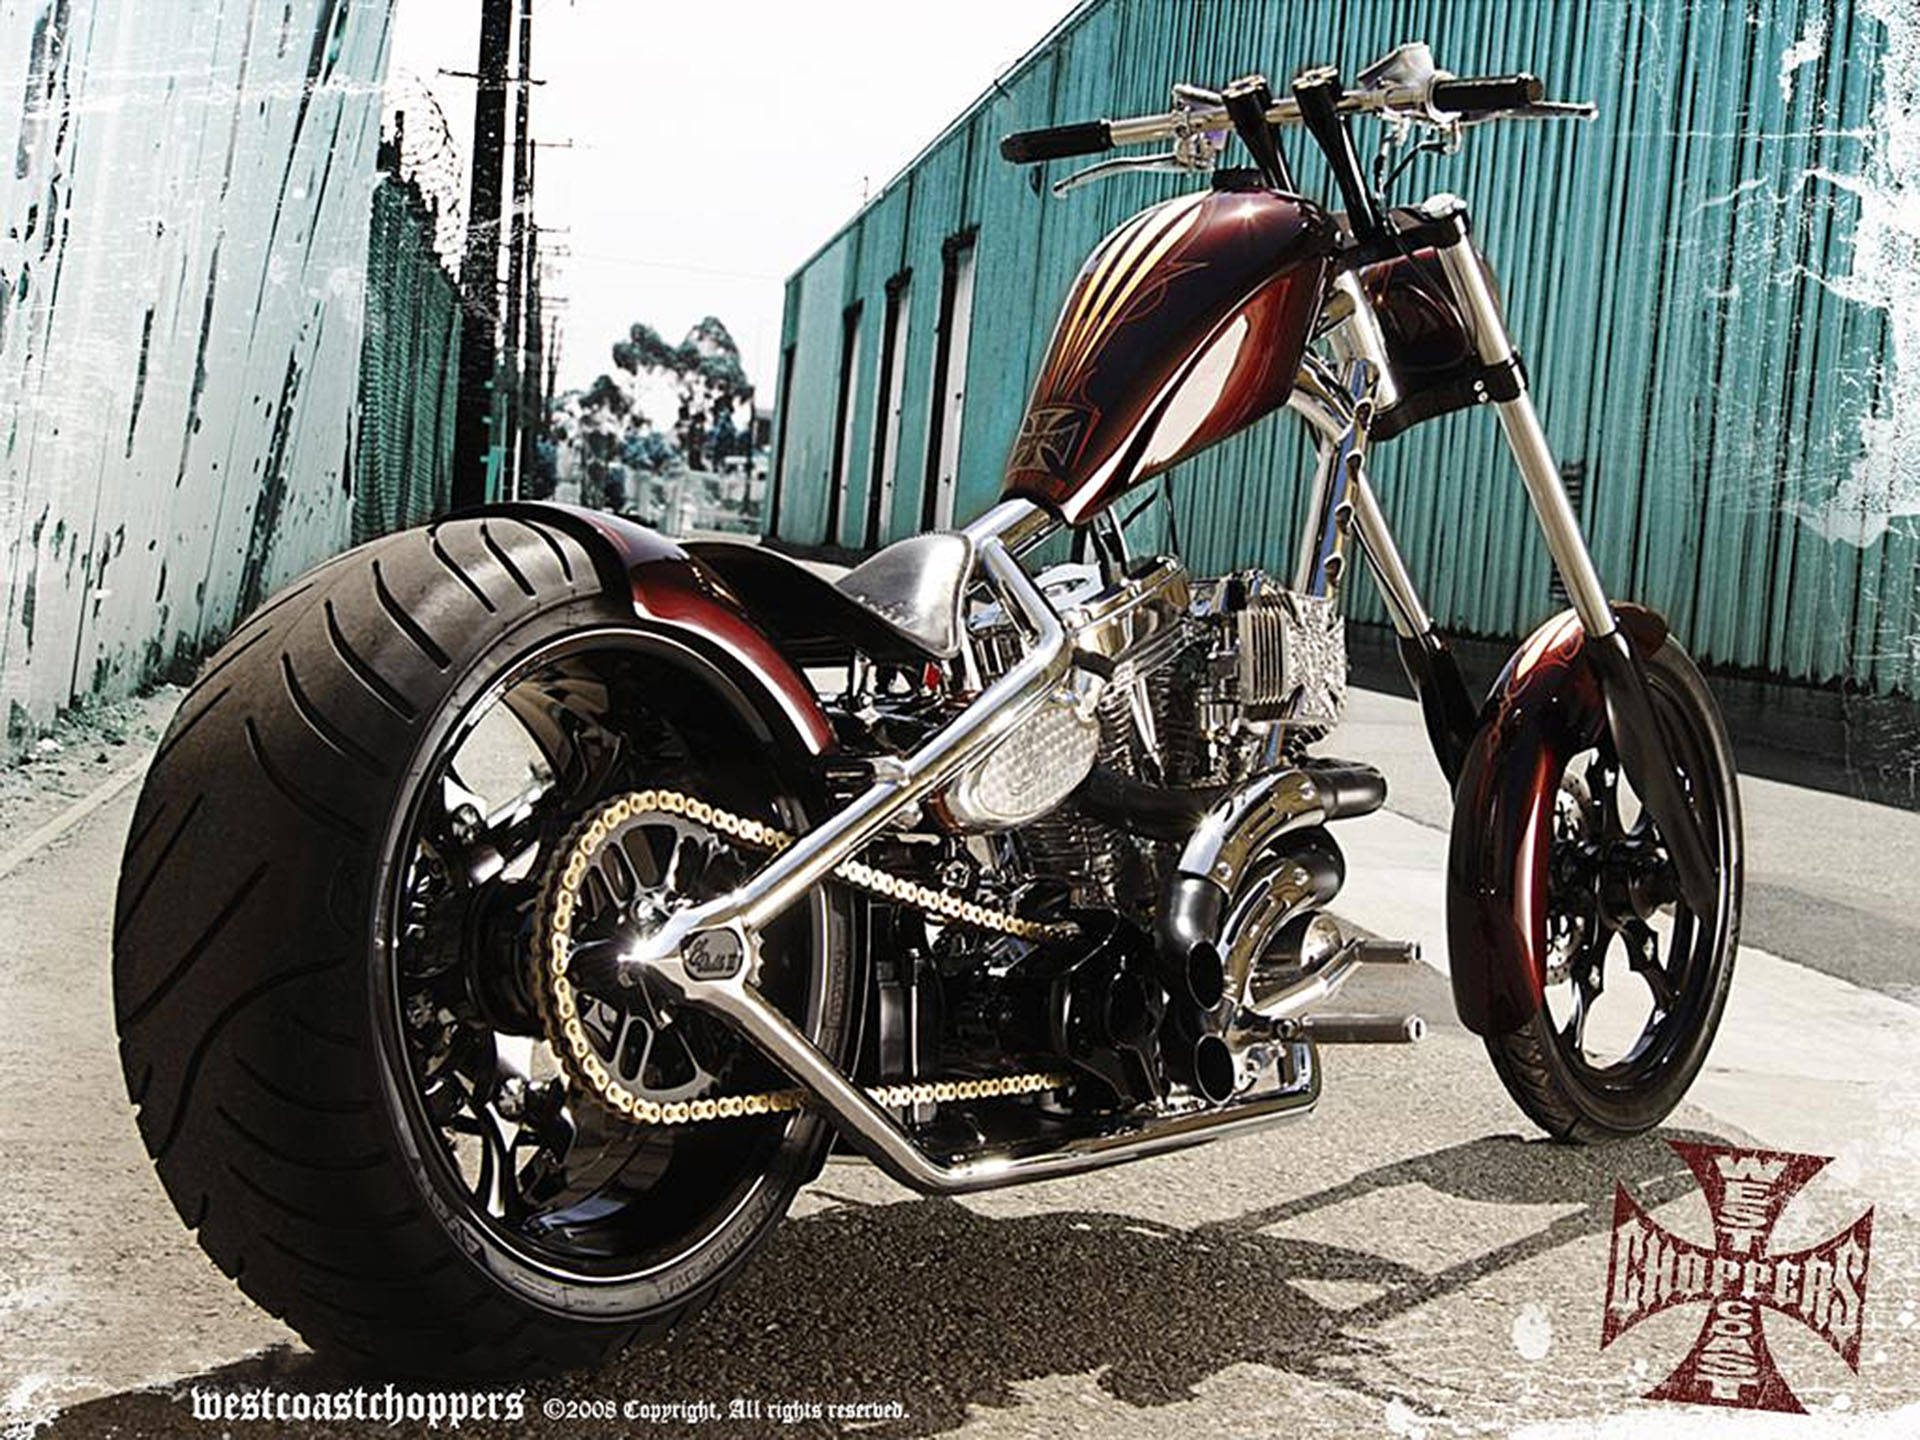 West Coast Choppers Maroon Motorcycle Background